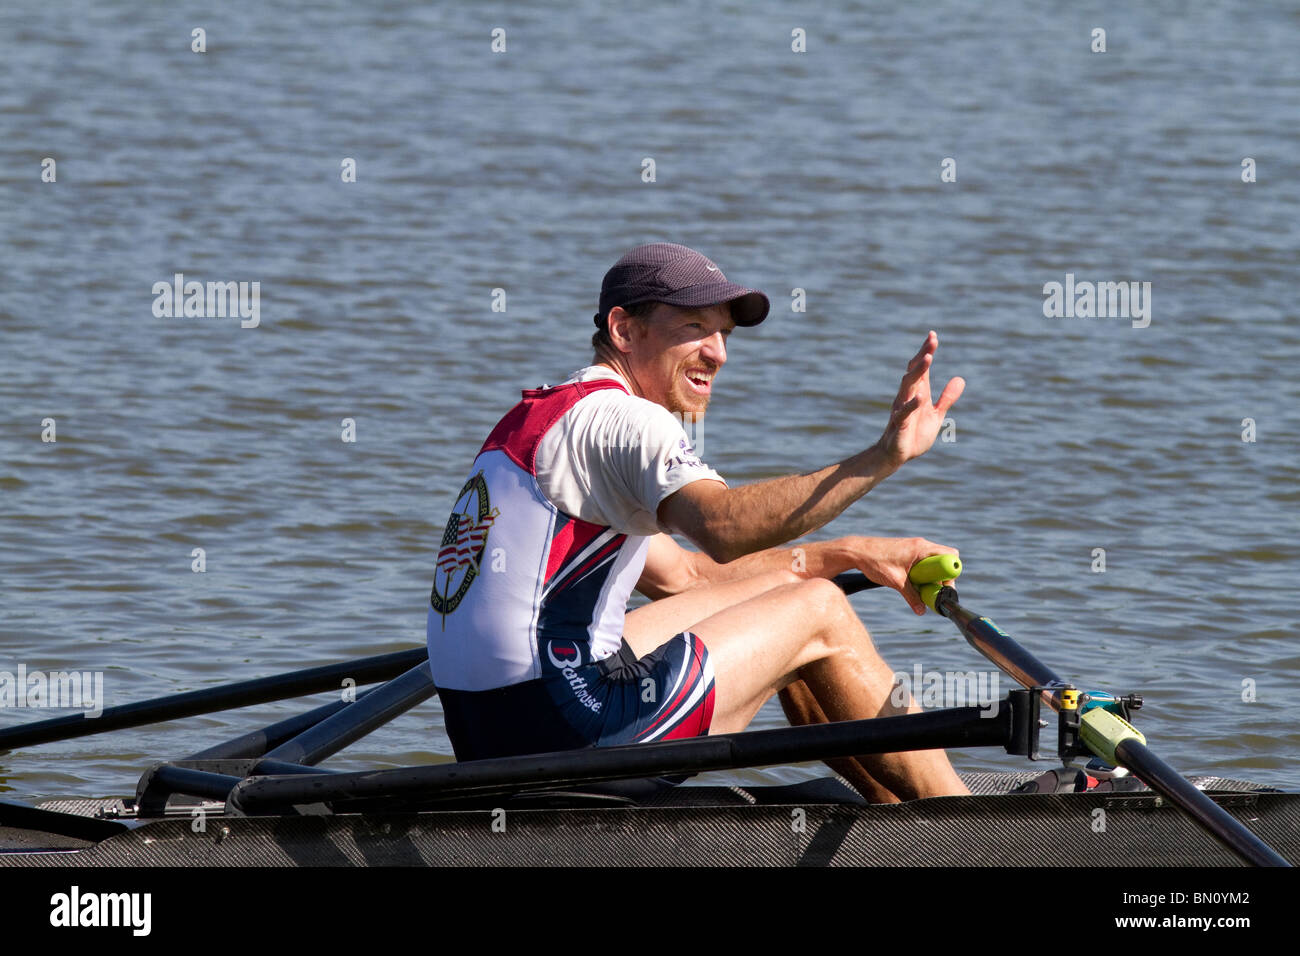 A Young male rower at the US Rowing National Championship Regatta at Mercer County Park New Jersey. Lake Mercer. Stock Photo